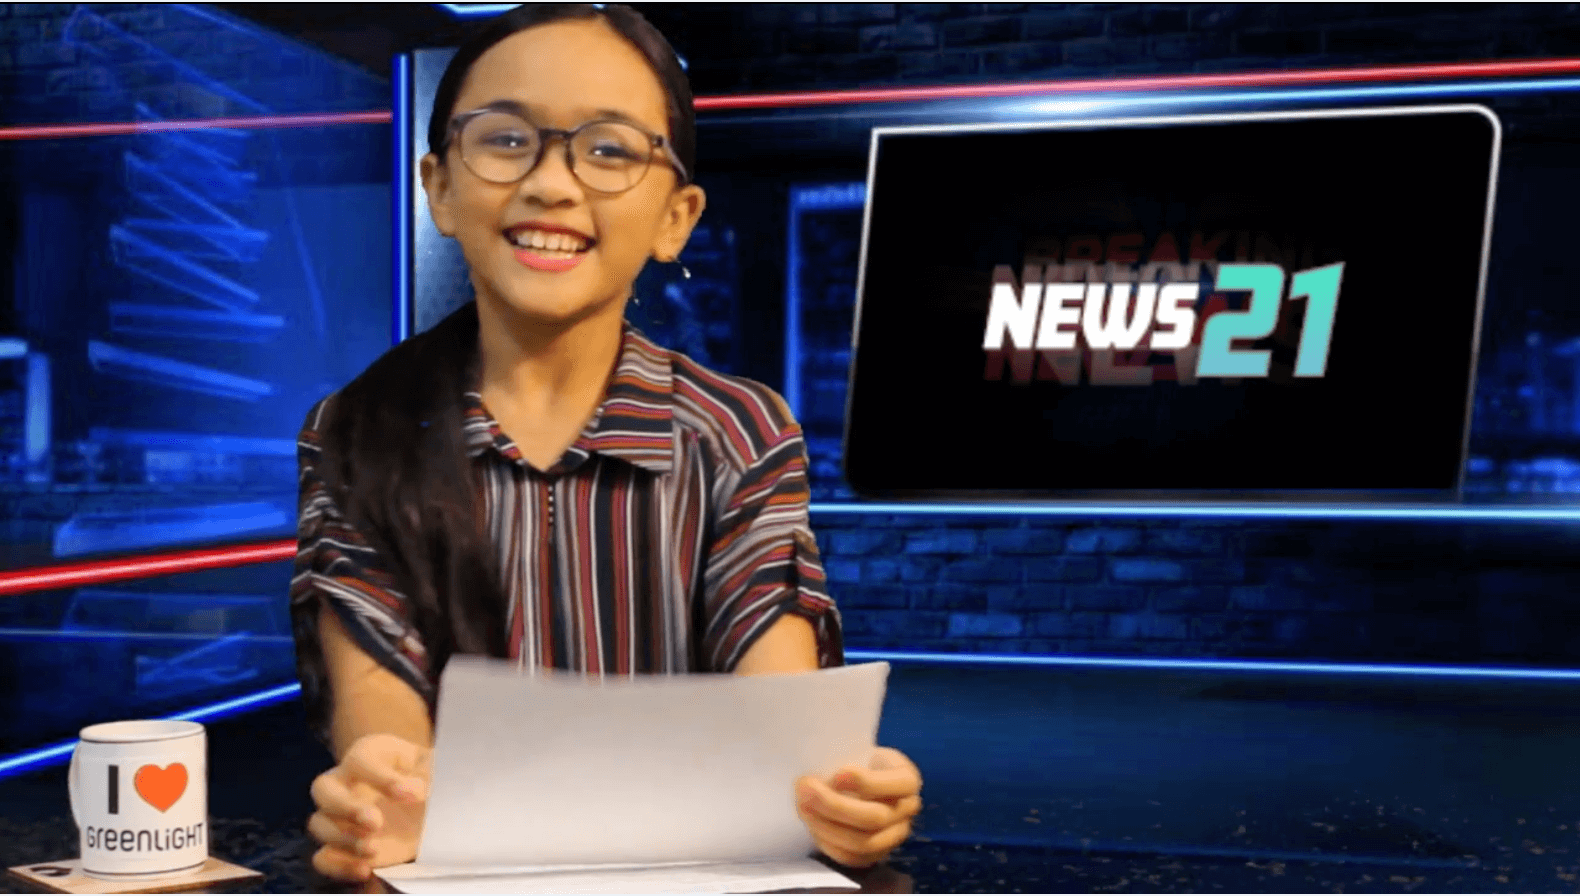 young lady giving a news broadcast